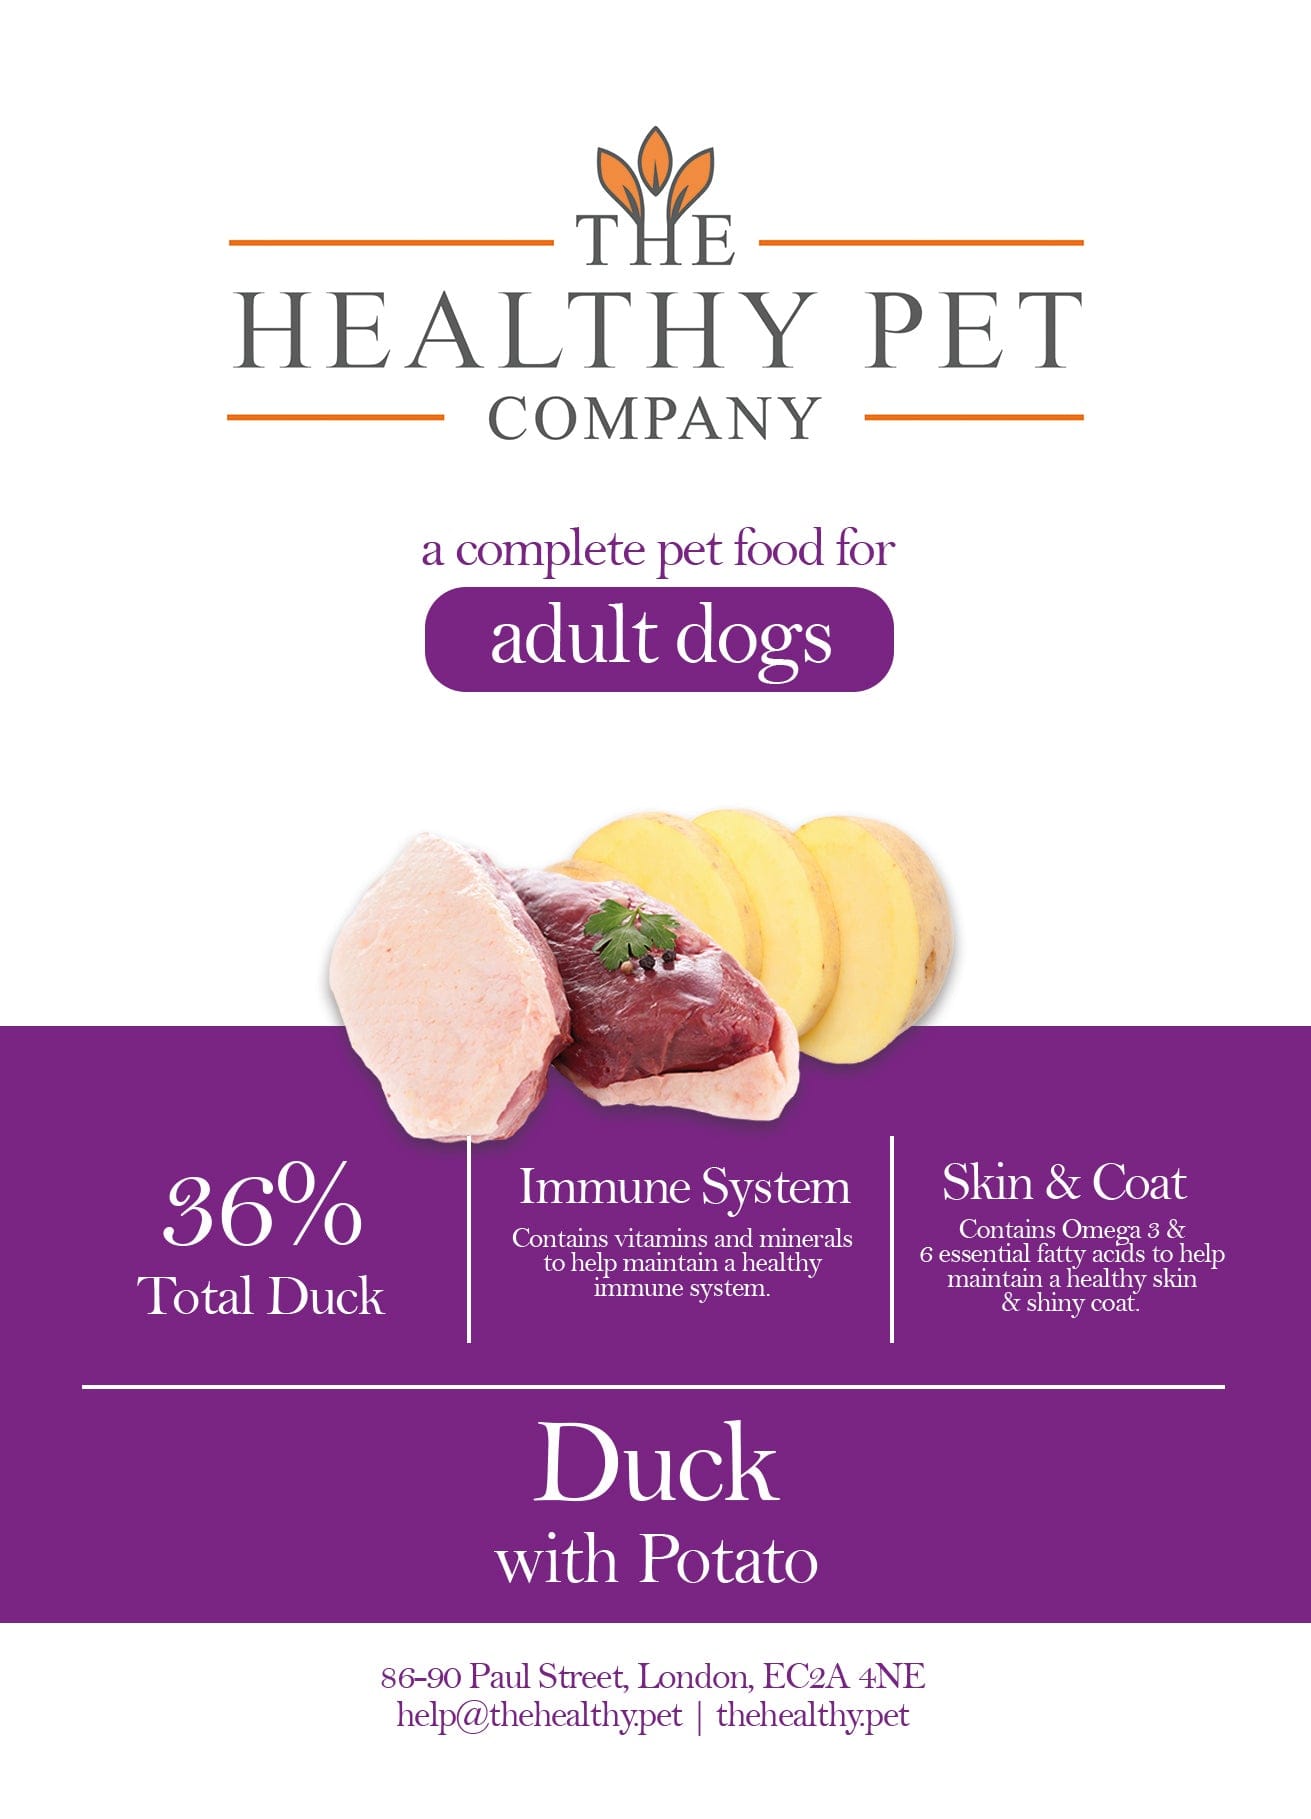 The Healthy Pet Company Complete Meal - Duck with Potato for Adult Dogs - The Healthy Pet Company